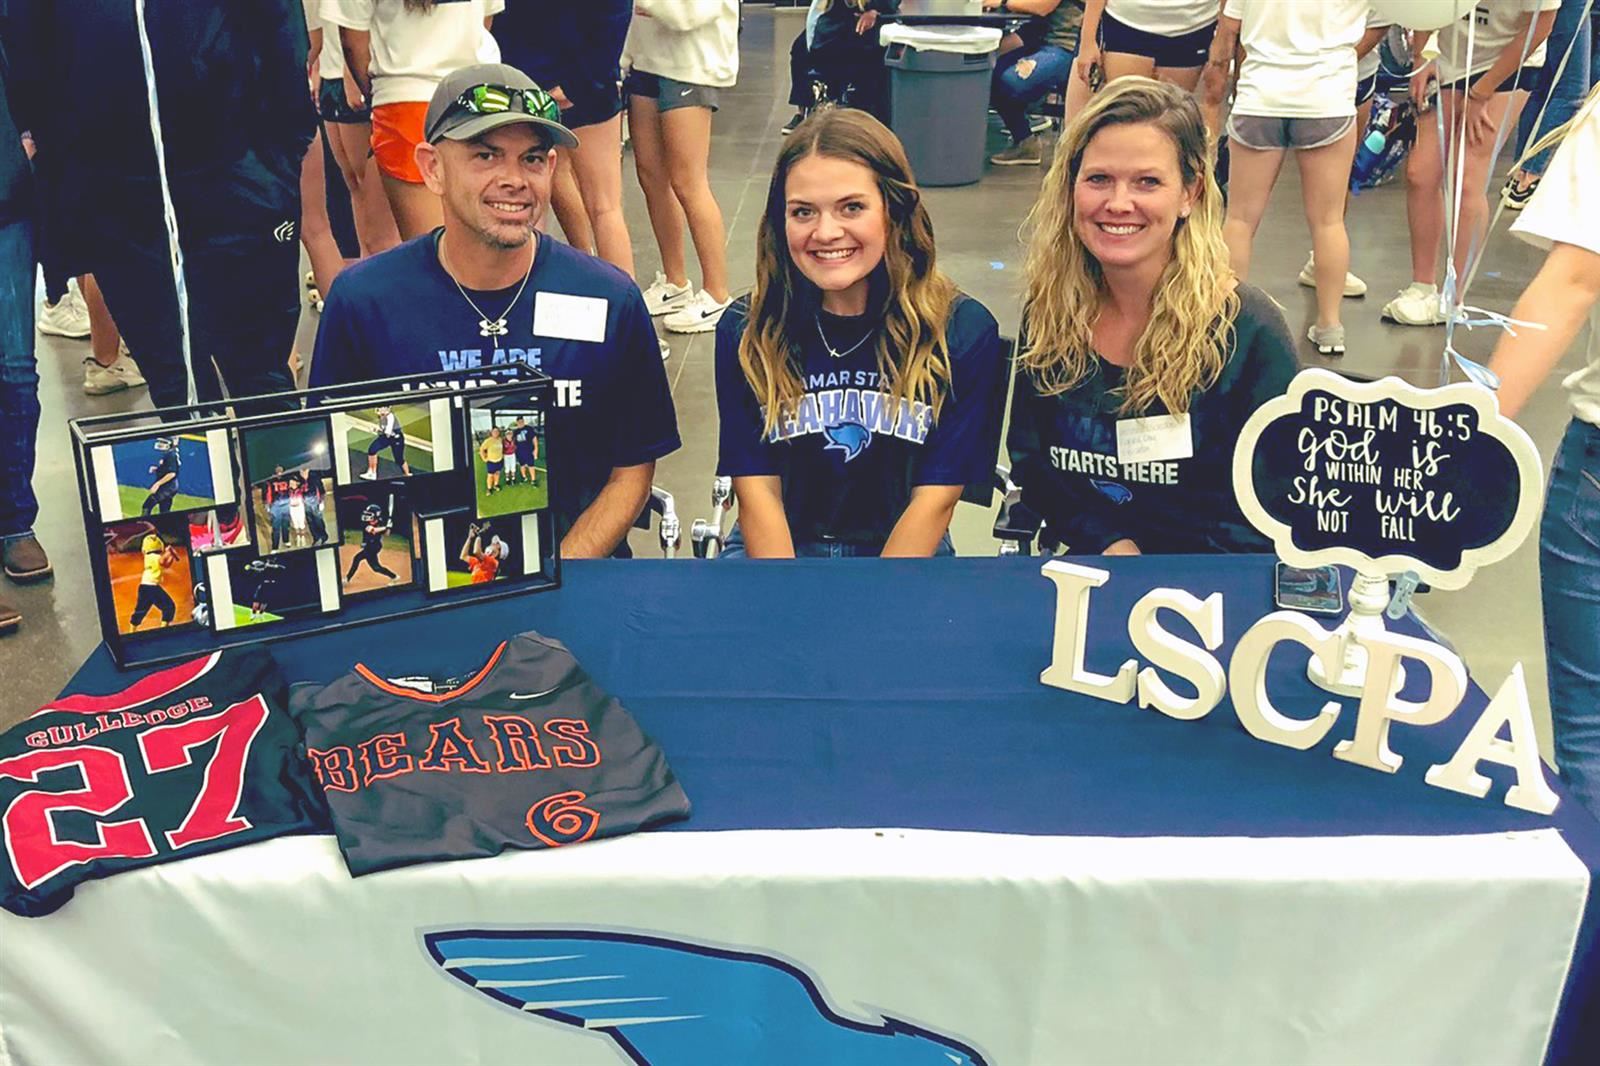 Bridgeland senior Kyleigh Gulledge, center, signed a letter of intent to play softball at Lamar State College-Port Arthur.